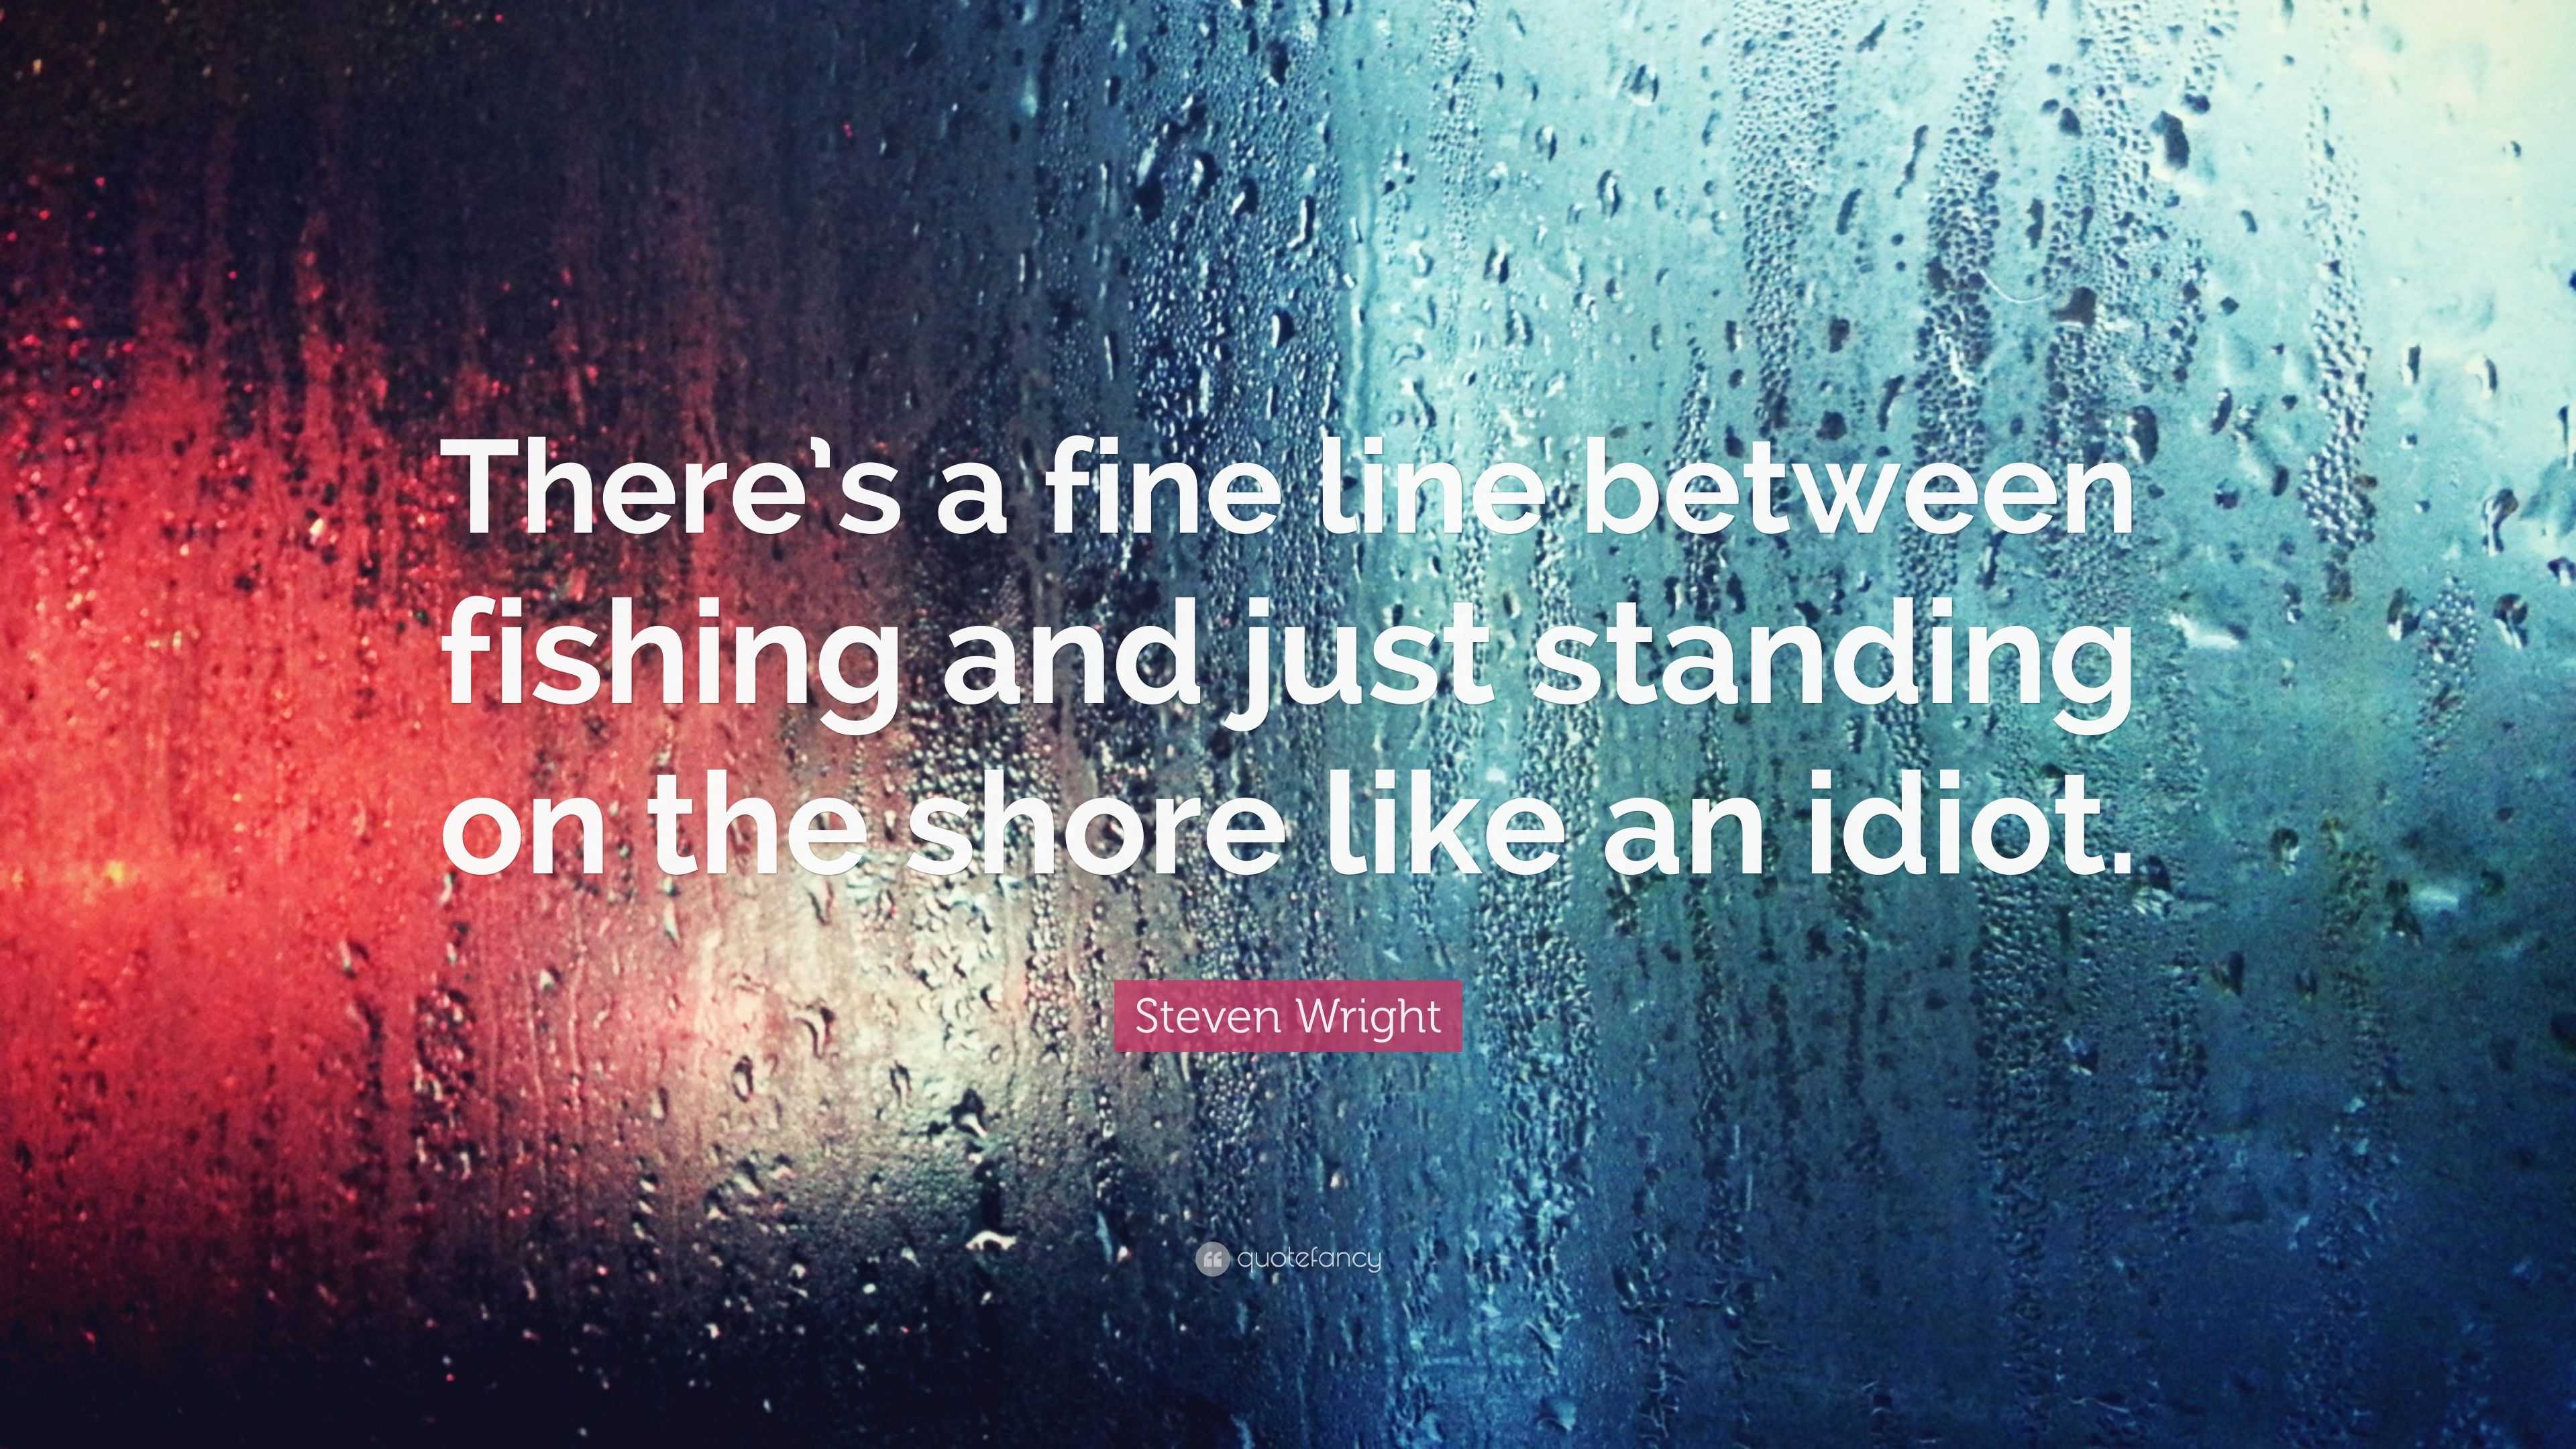 Steven Wright Quote: “There's a fine line between fishing and just